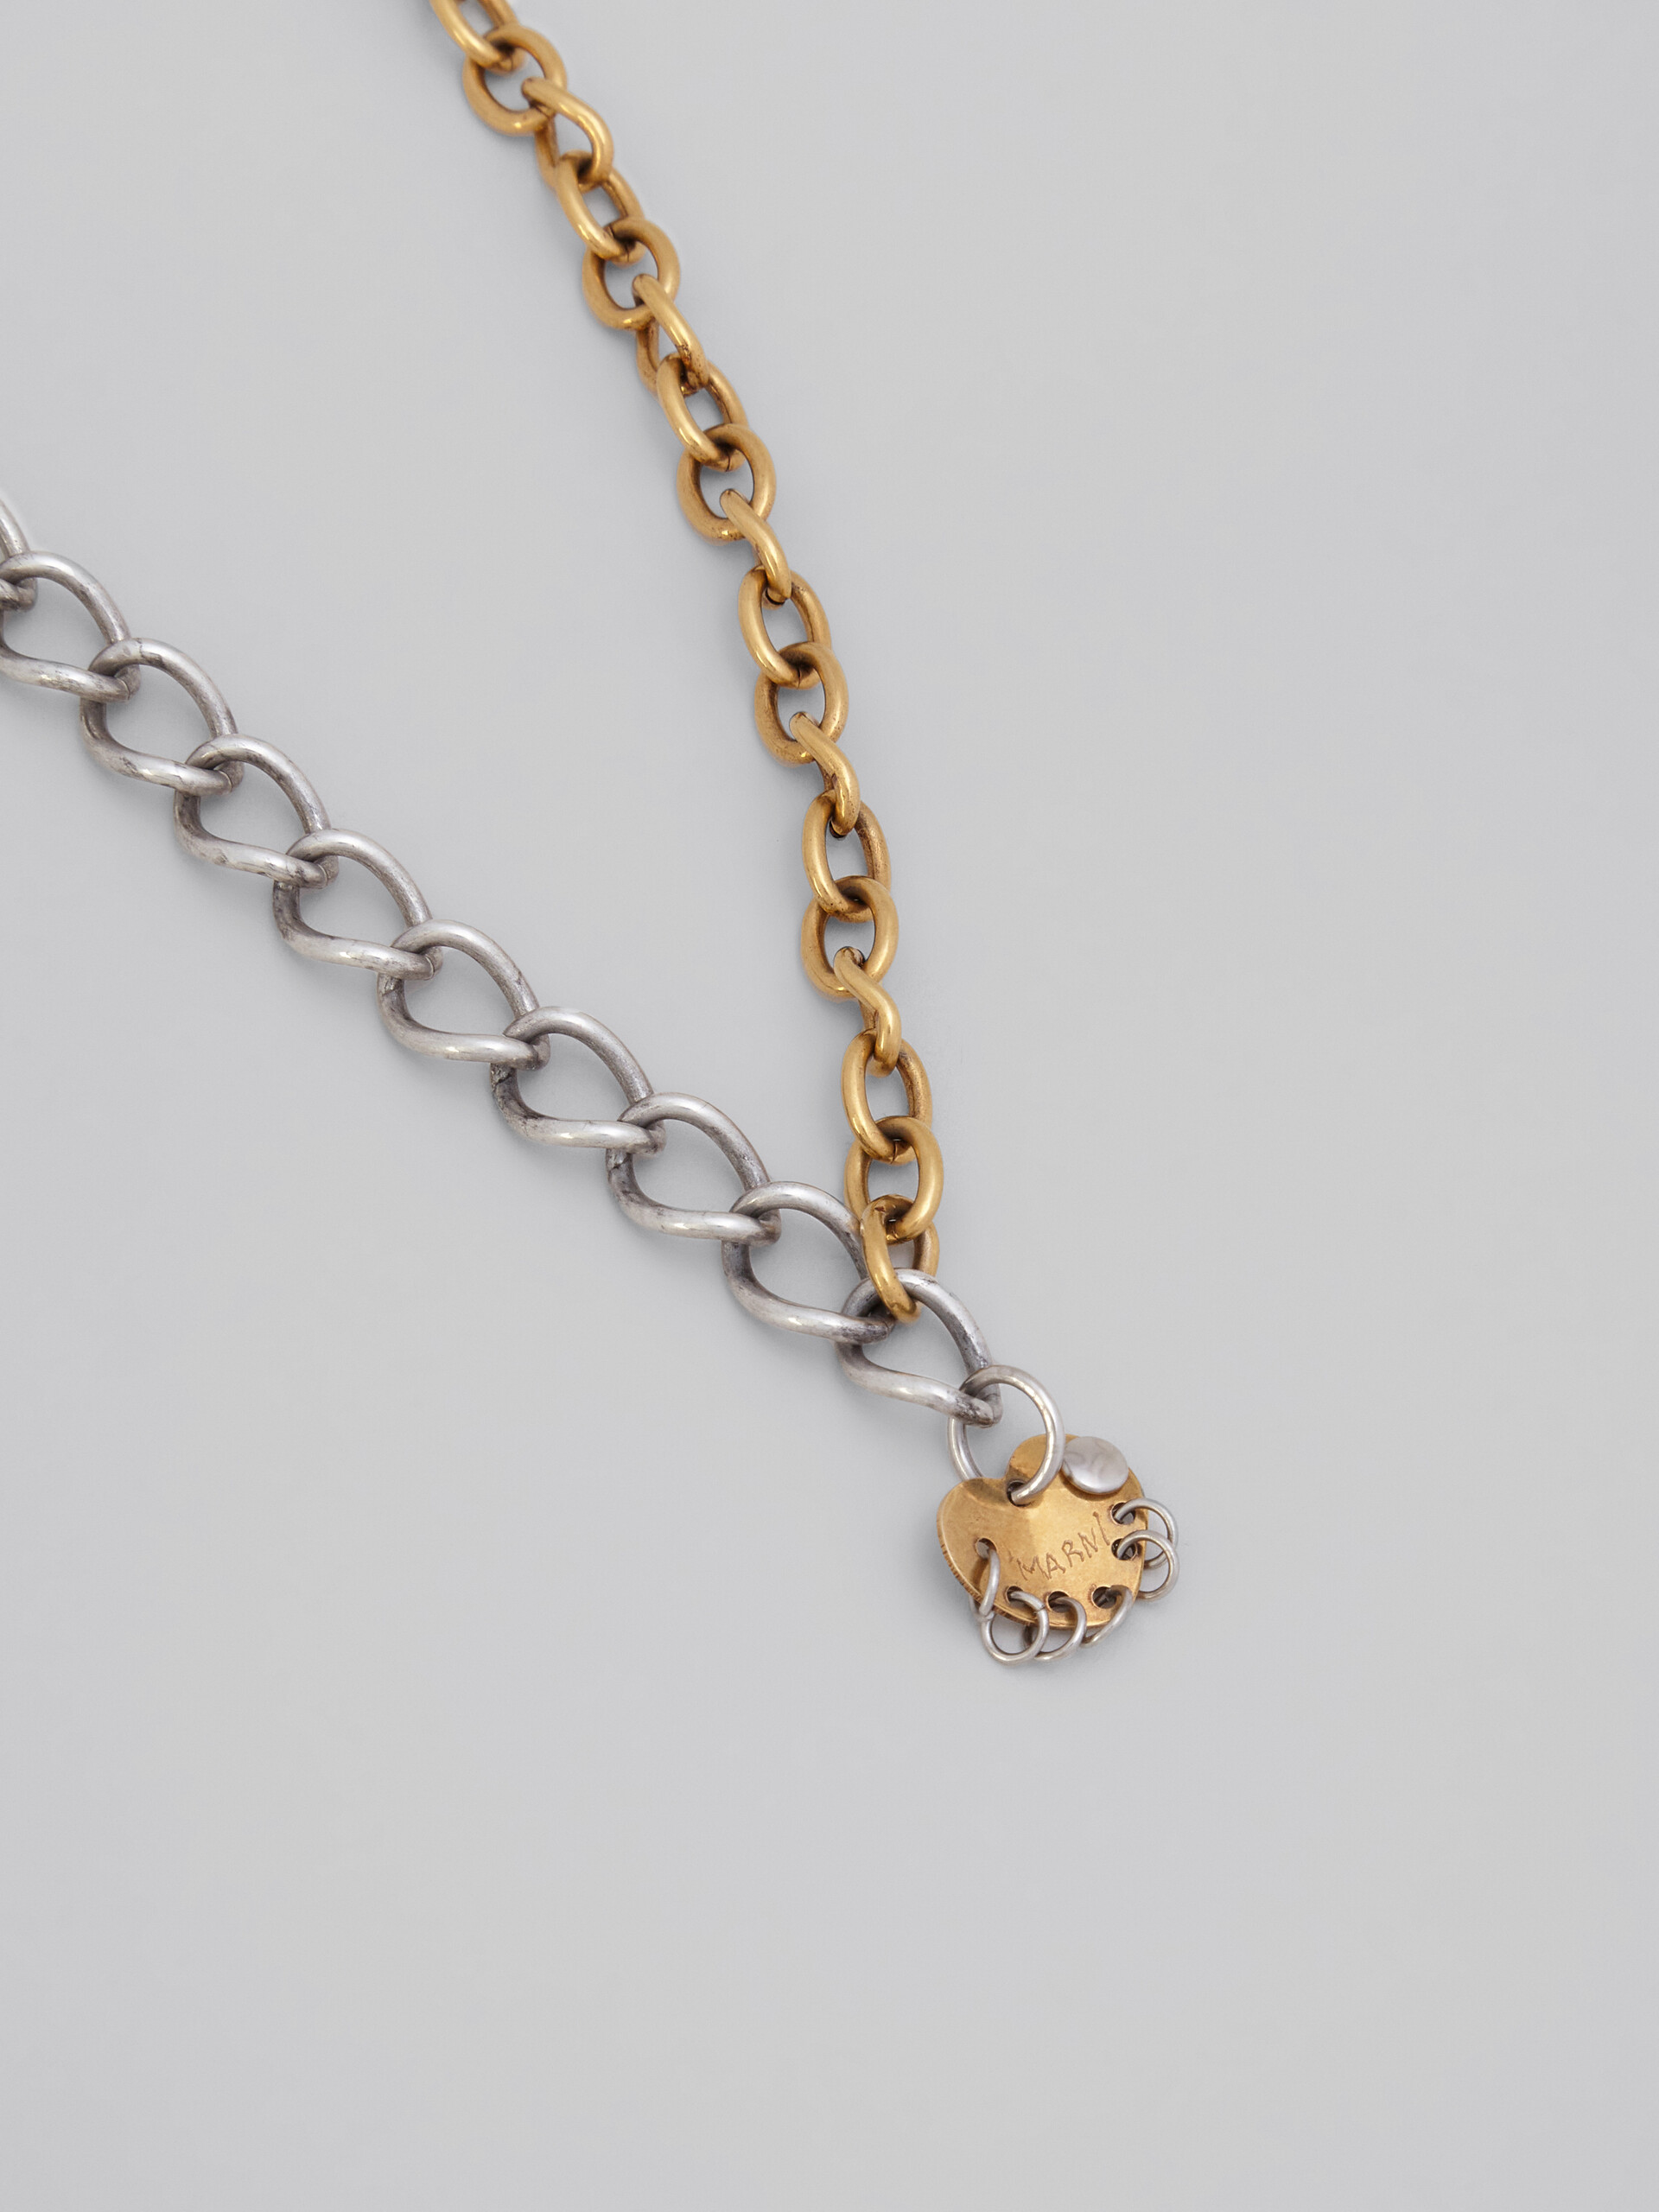 Raw Hearts two-tone chain necklace - Necklaces - Image 3